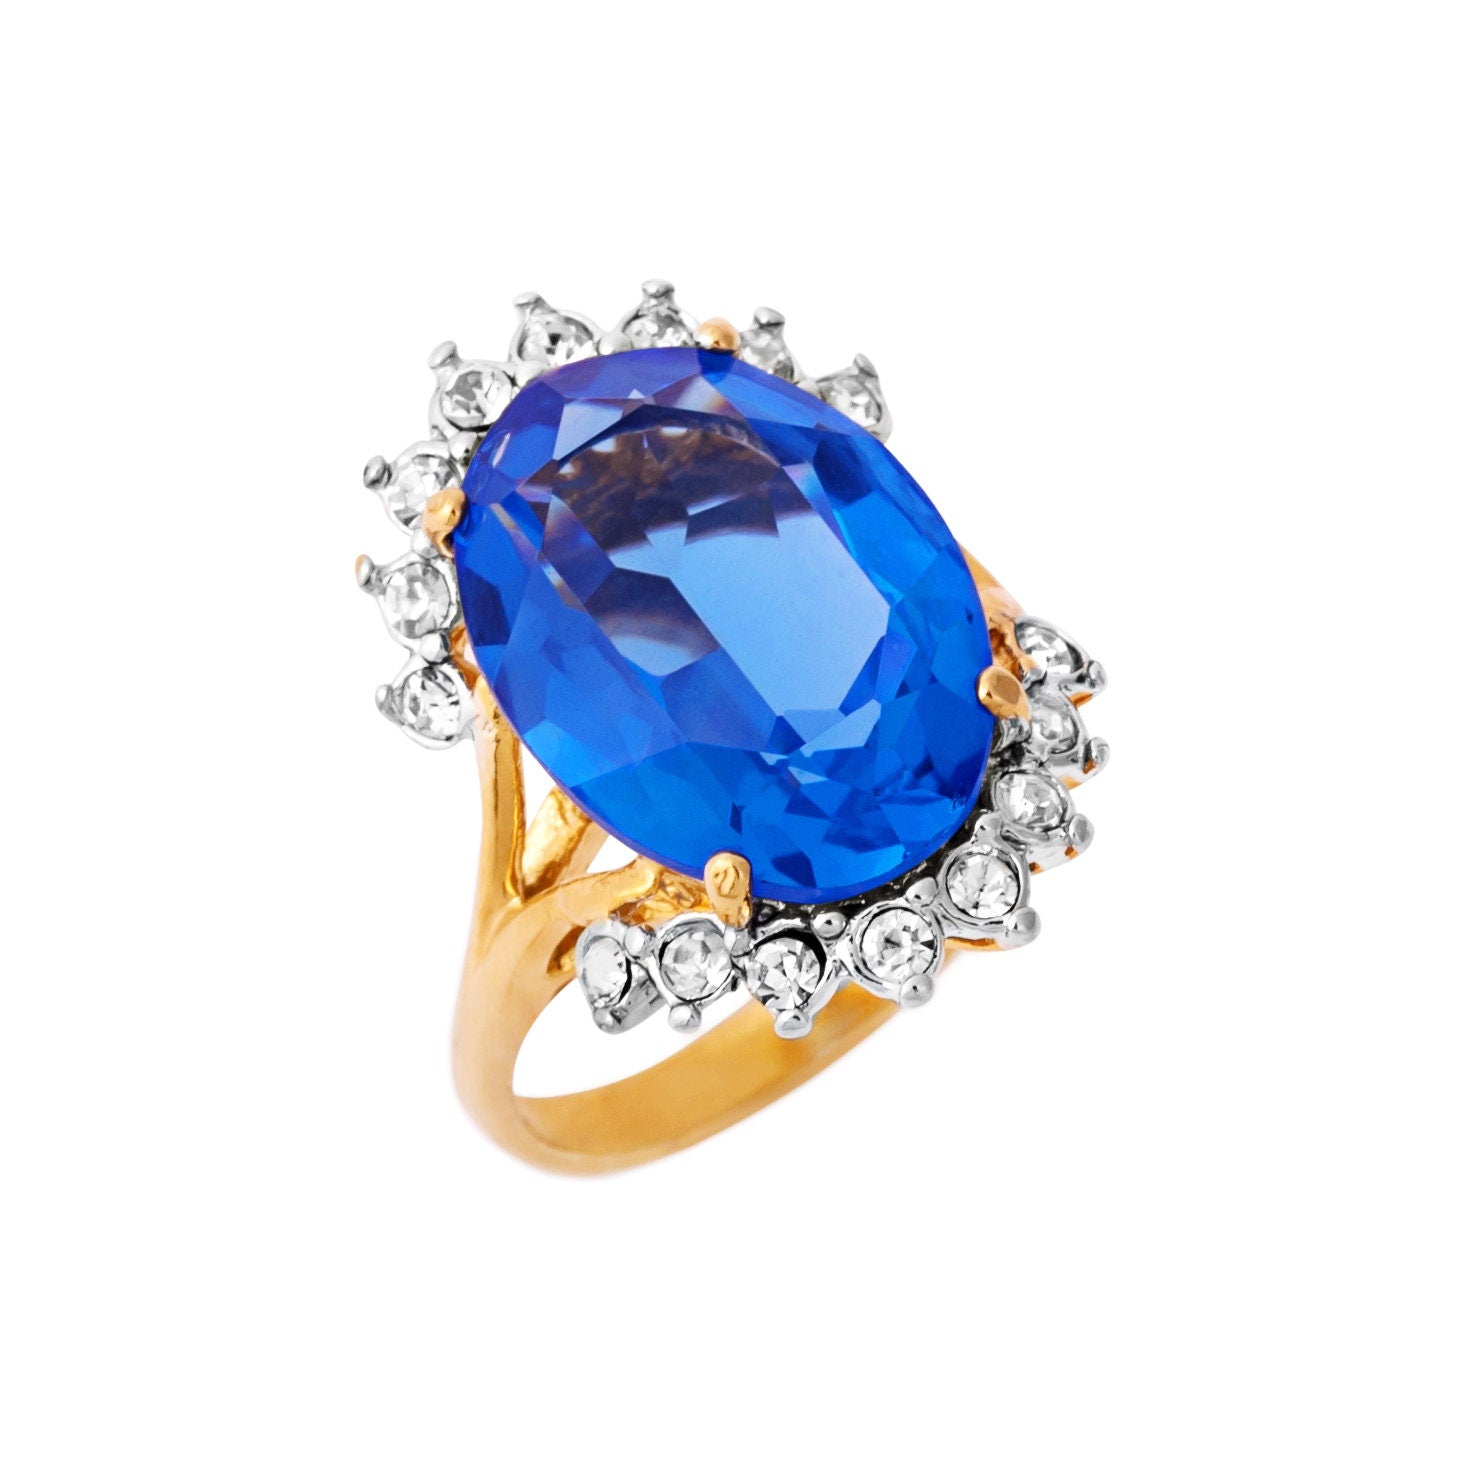 Vintage Ring Blue Topaz and Clear Swarovski Crystal Ring 18k Gold  R1909 - Limited Stock - Never Worn